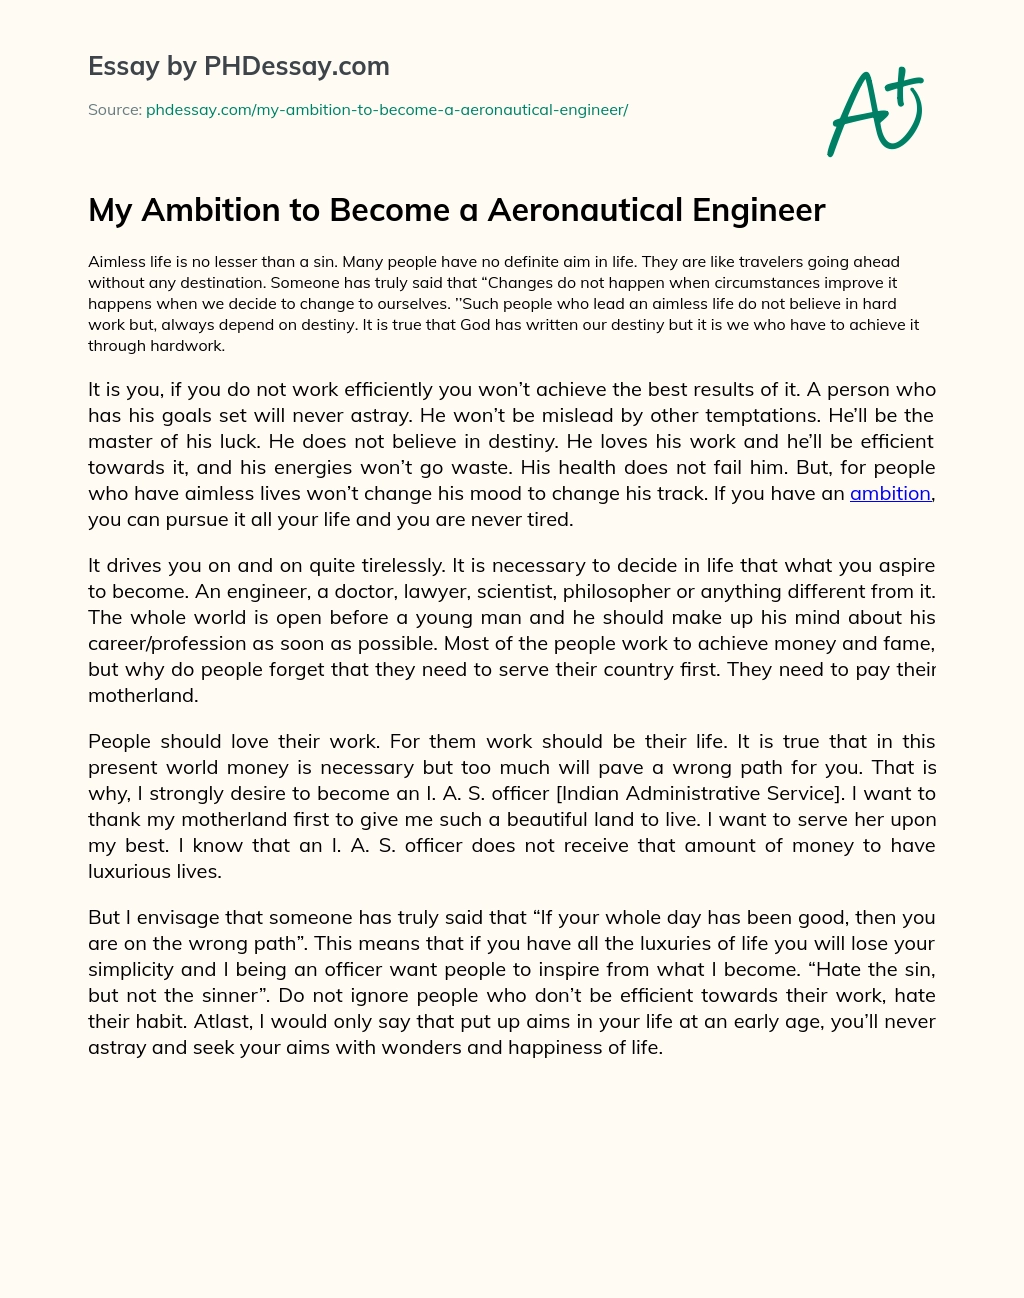 My Ambition to Become a Aeronautical Engineer essay